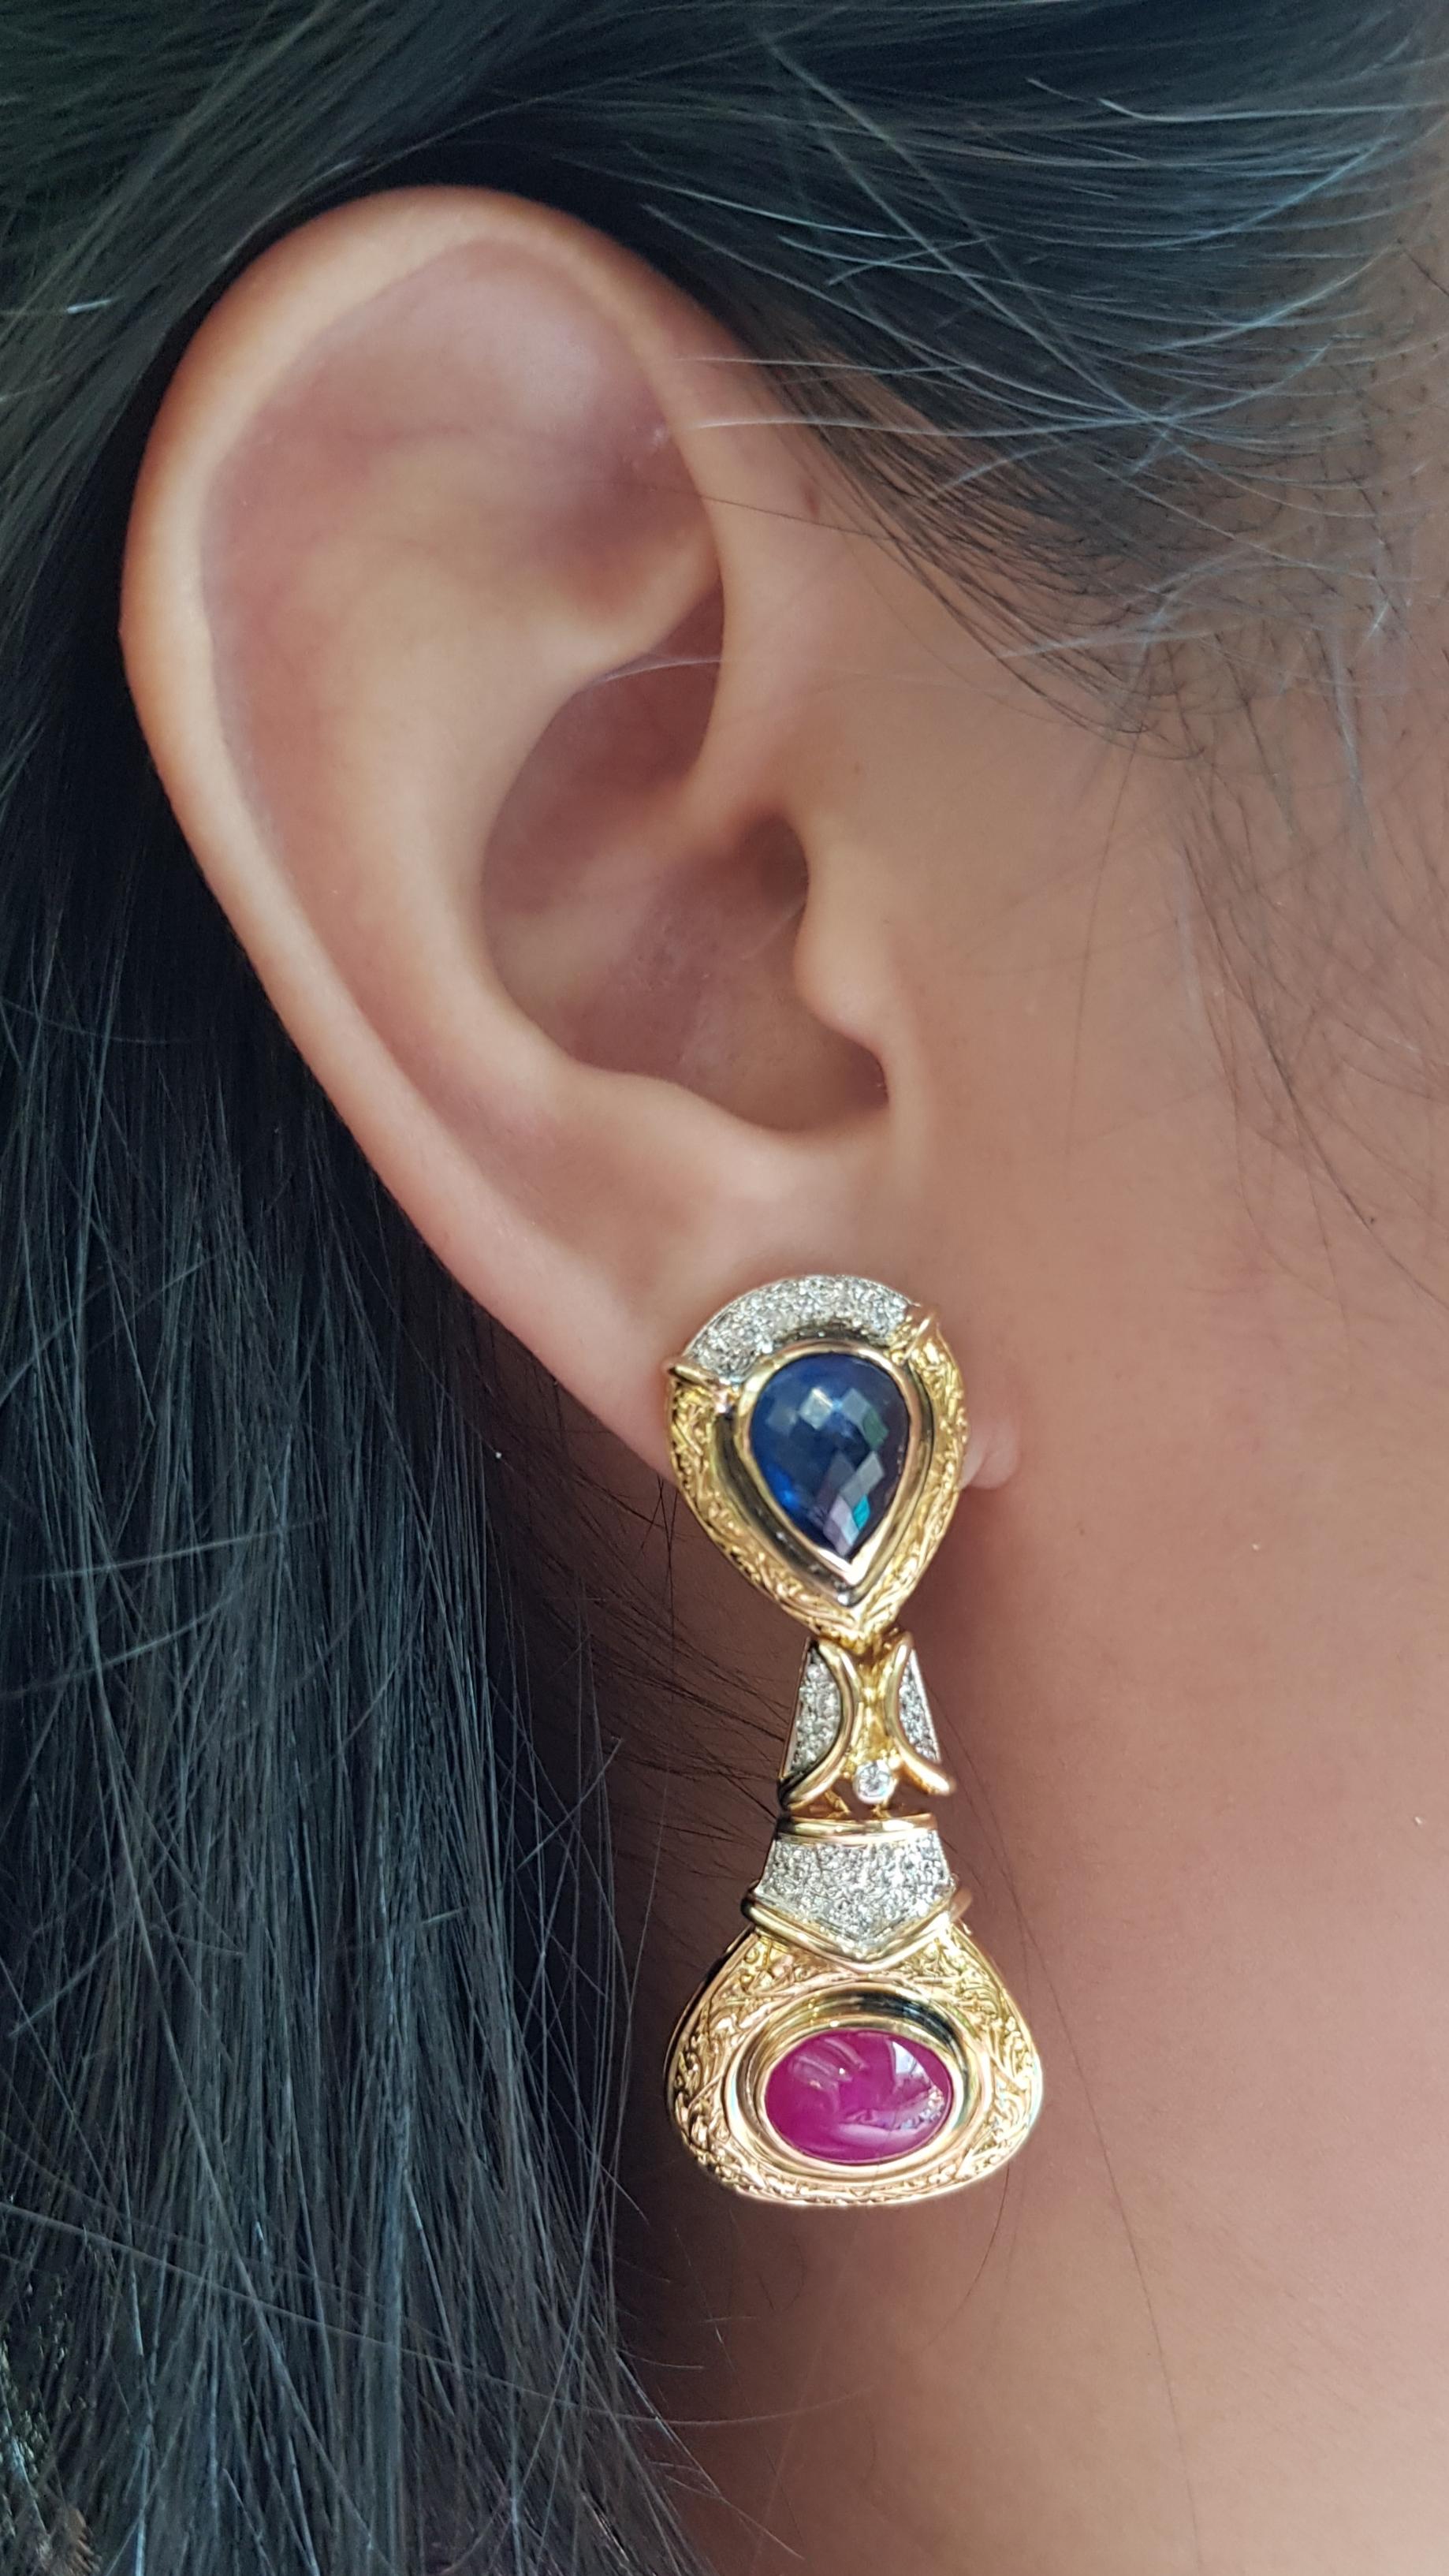 Cabochon Blue Sapphire 6.55 carats, Cabochon Ruby 6.74 carats with Diamond 0.40 carat Earrings set in 18 Karat Gold Settings

Width:  2.0 cm 
Length: 4.5 cm
Total Weight: 26.36 grams

